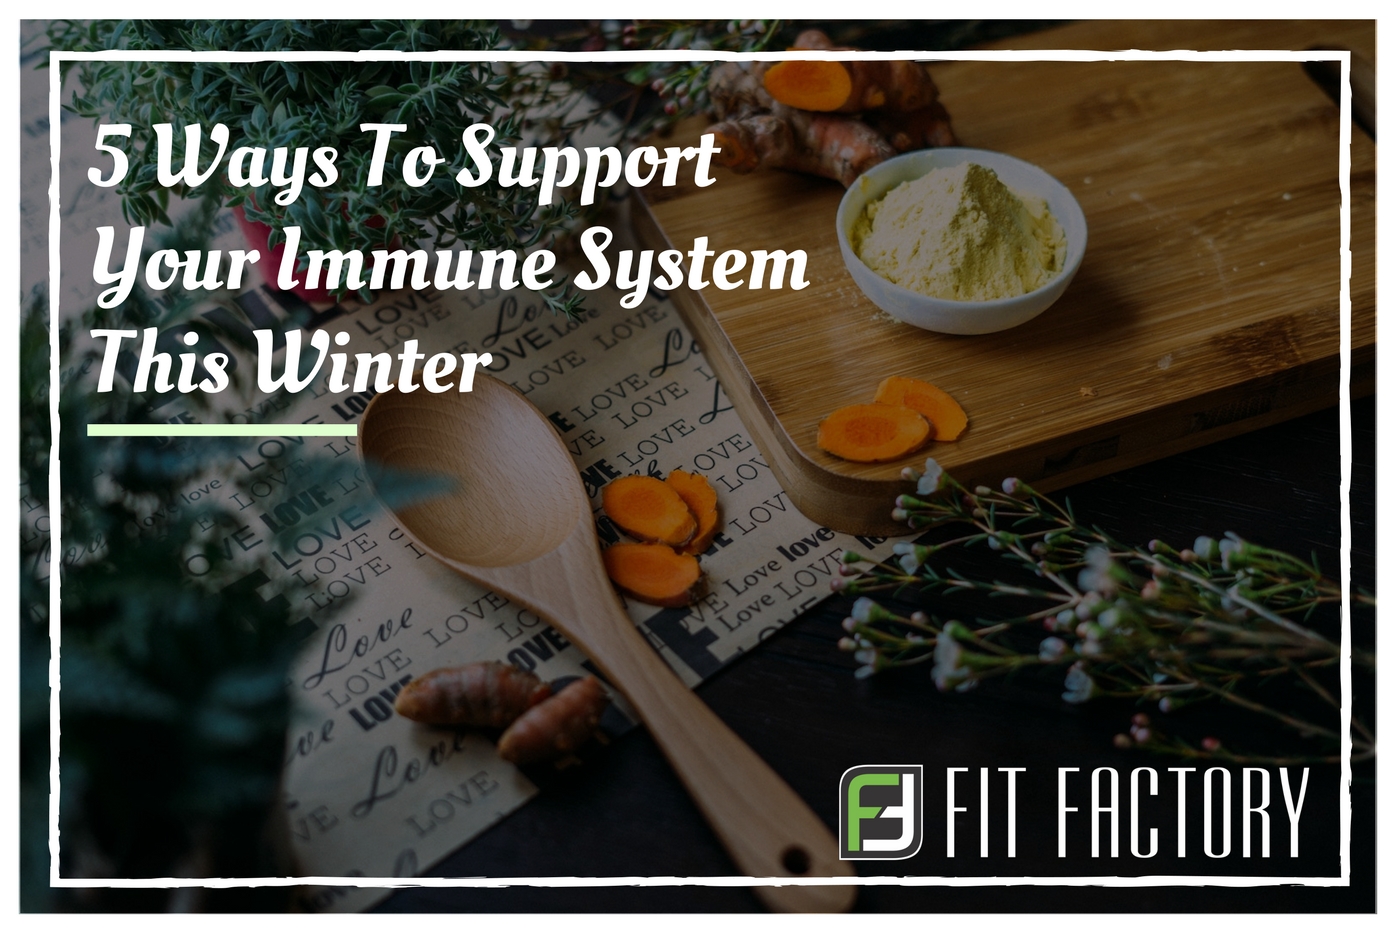 5 Ways To Support Your Immune System This Winter